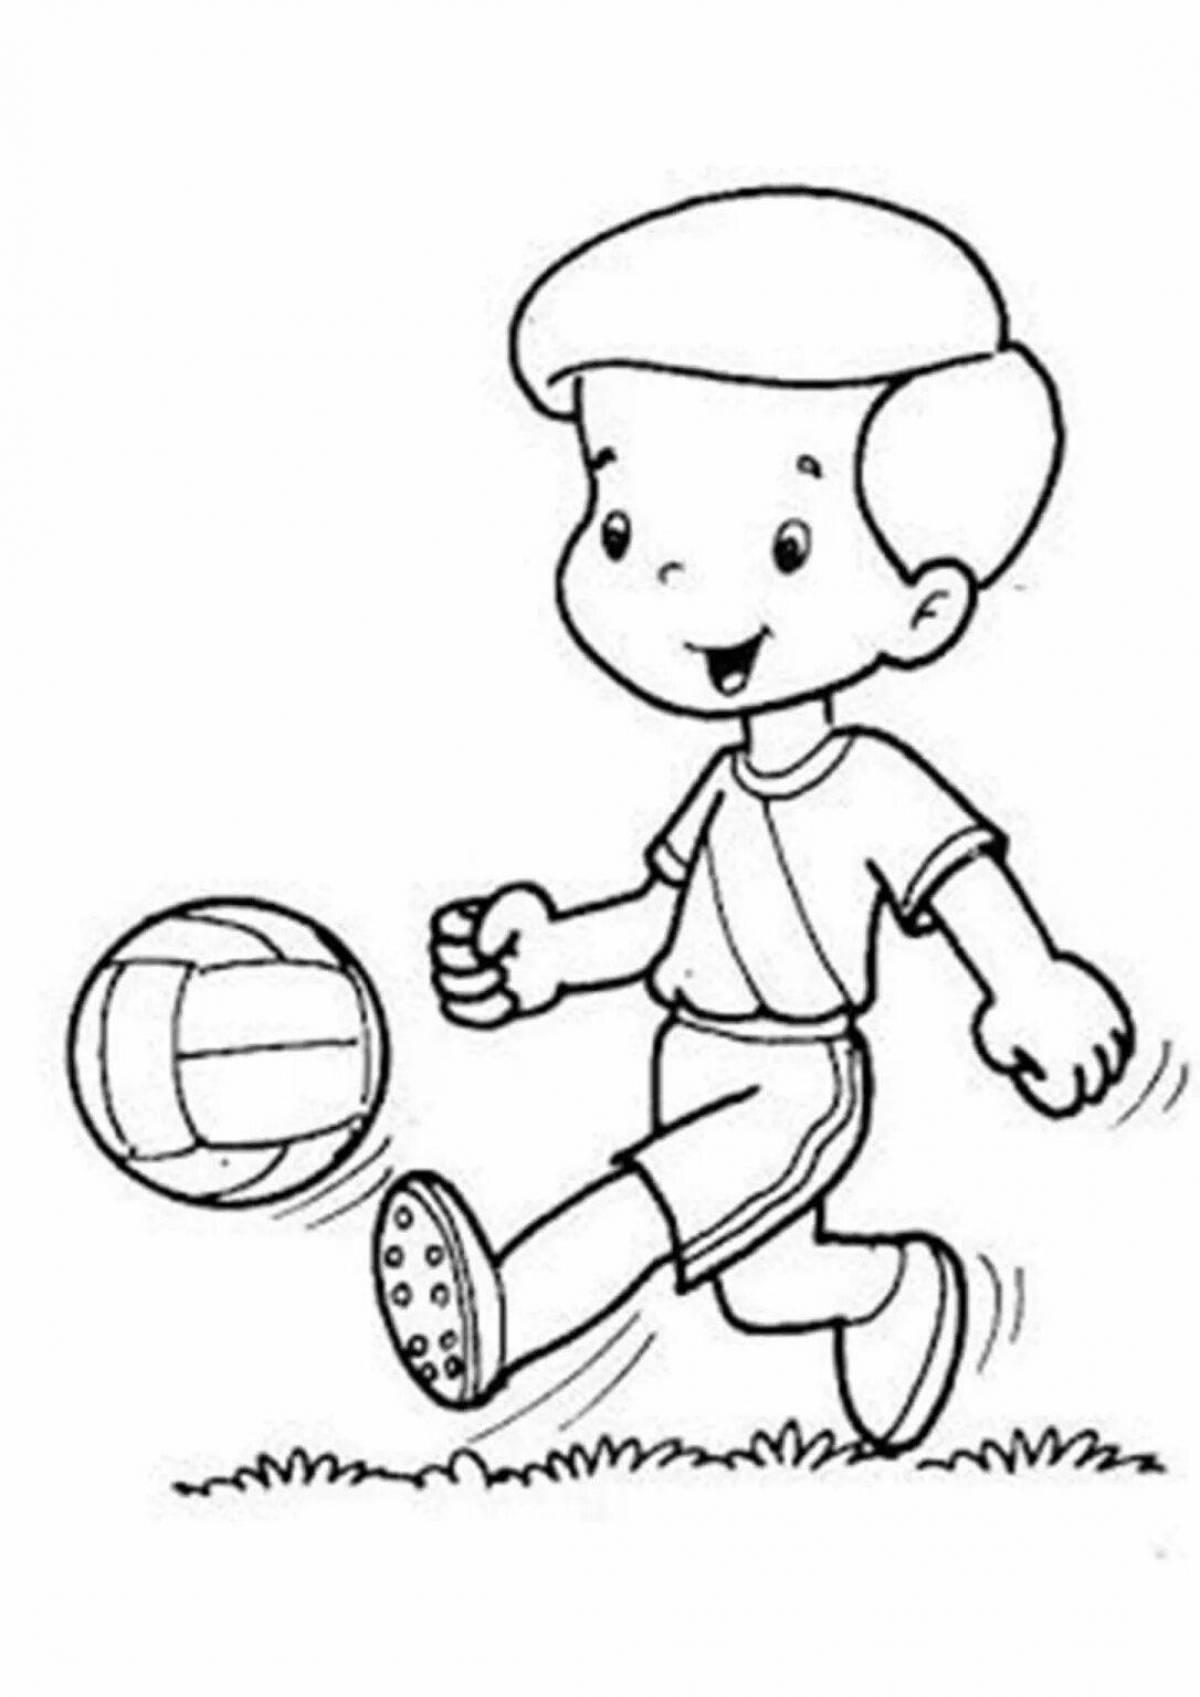 Physical Education Motivational Coloring Page